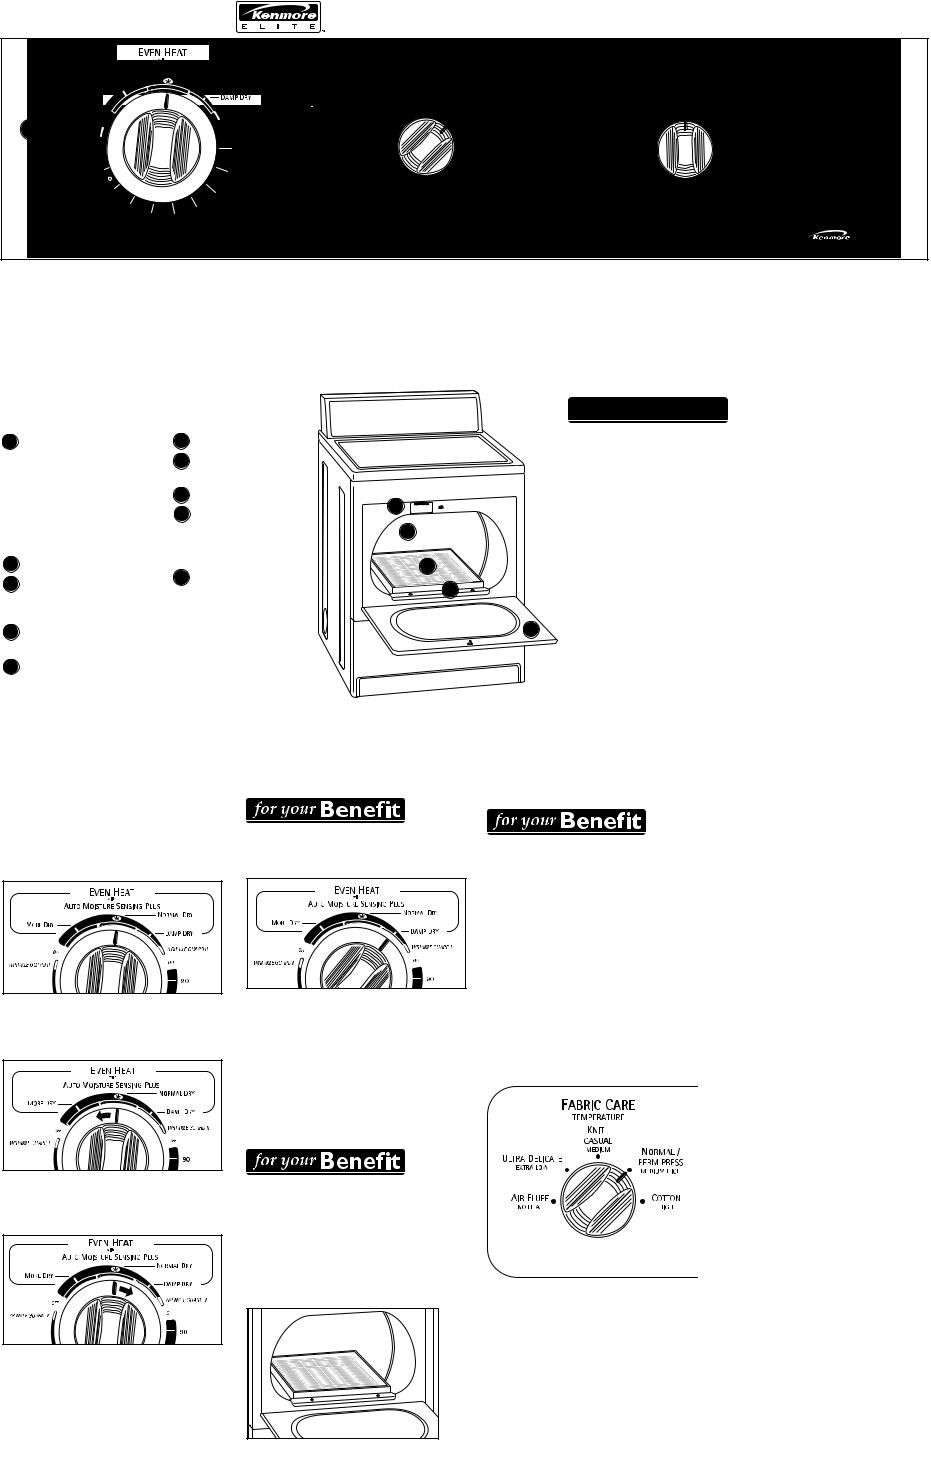 Kenmore C60952, C60956 Feature Sheet